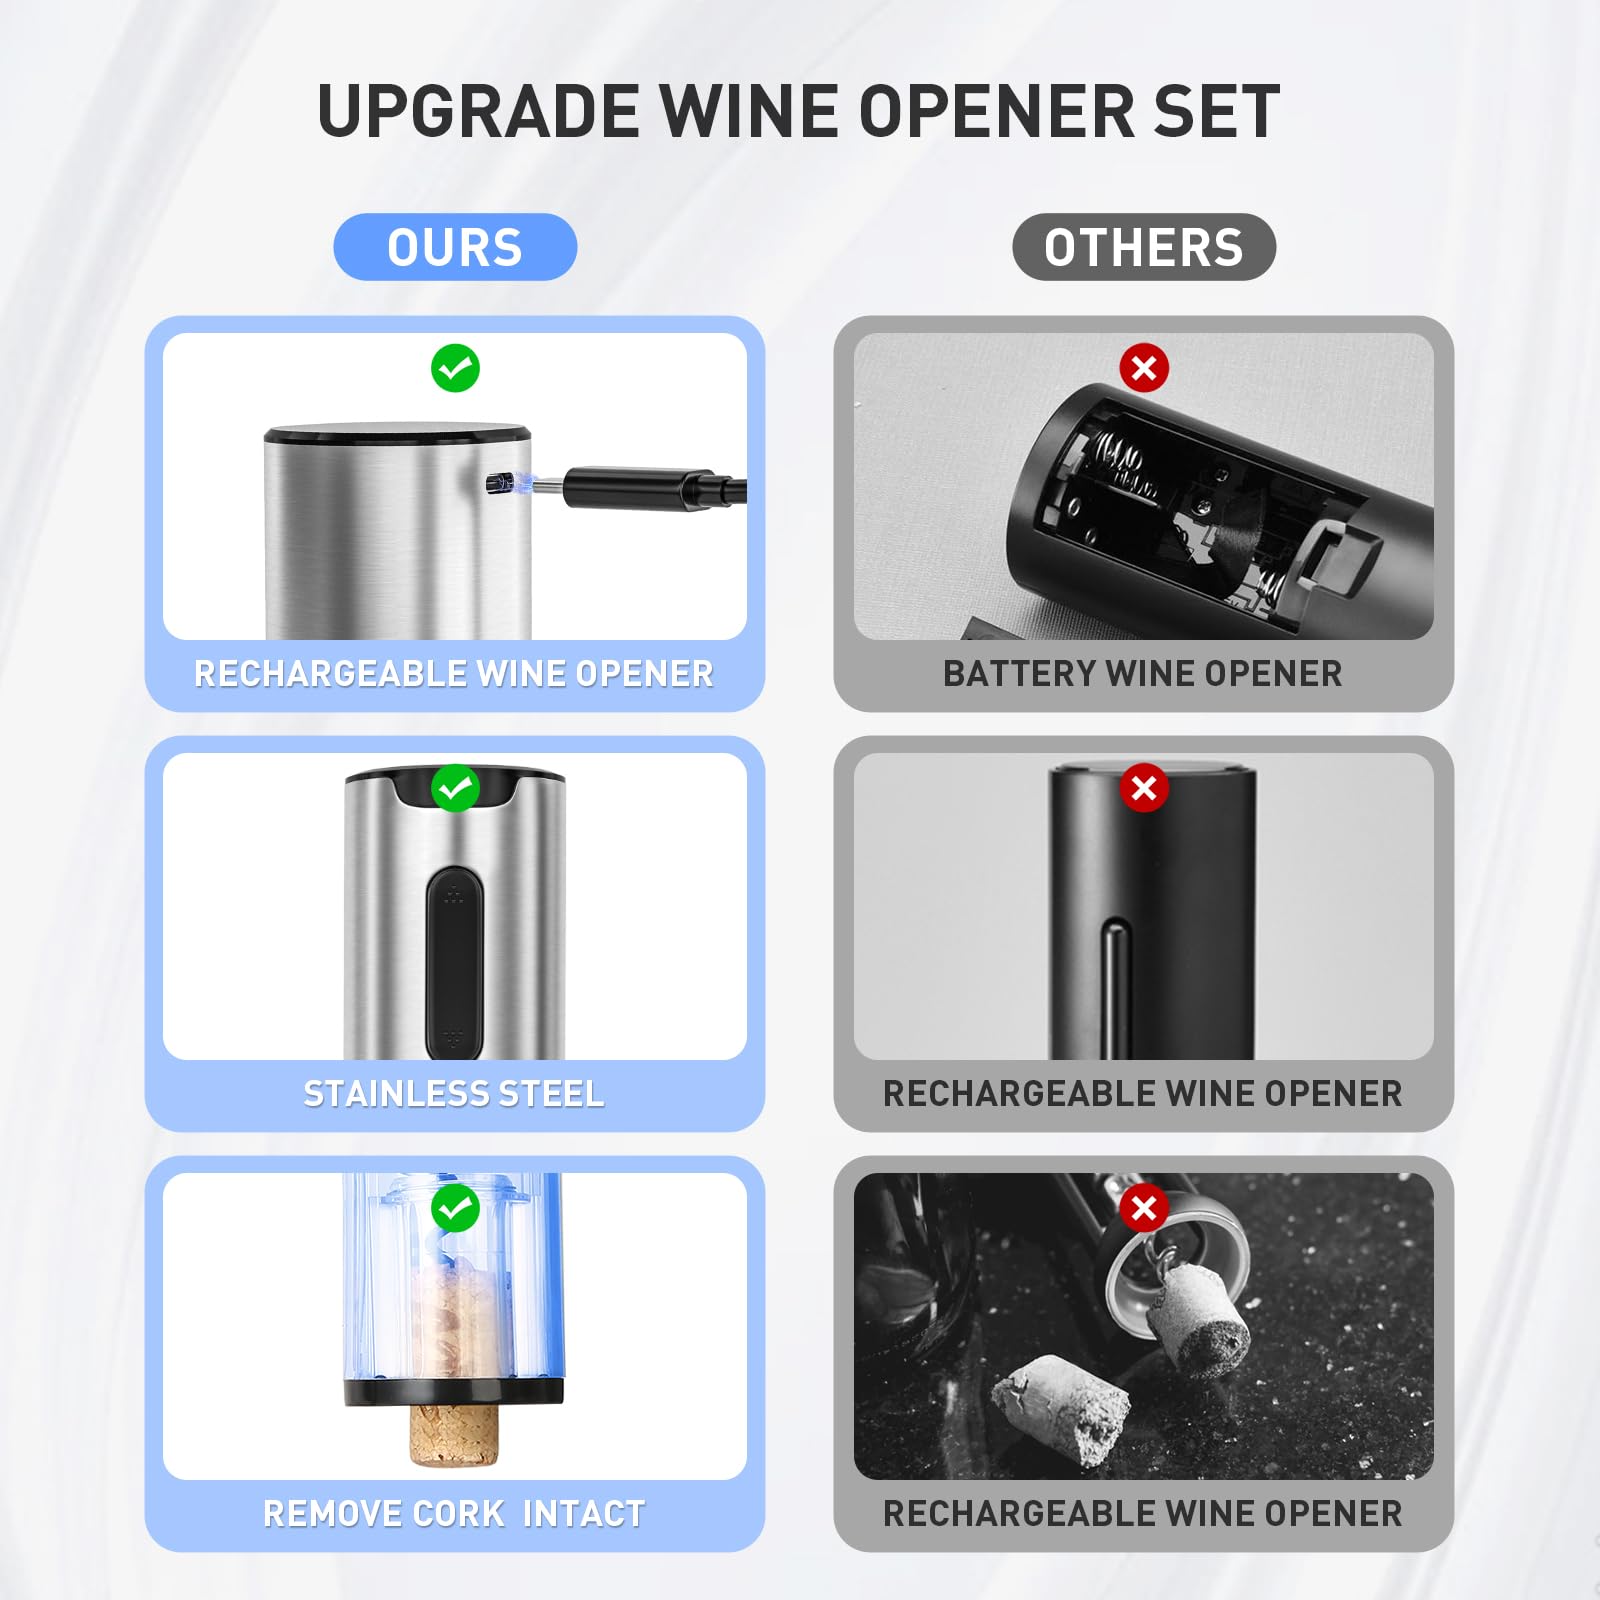 Secura Electric Wine Opener Set, Rechargeable Automatic Home Wine Bottle Opener Reusable Corkscrew with Foil Cutter, Vacuum Stoppers, Aerator Pourer Wine Set Gift for Wine Lovers, Sliver